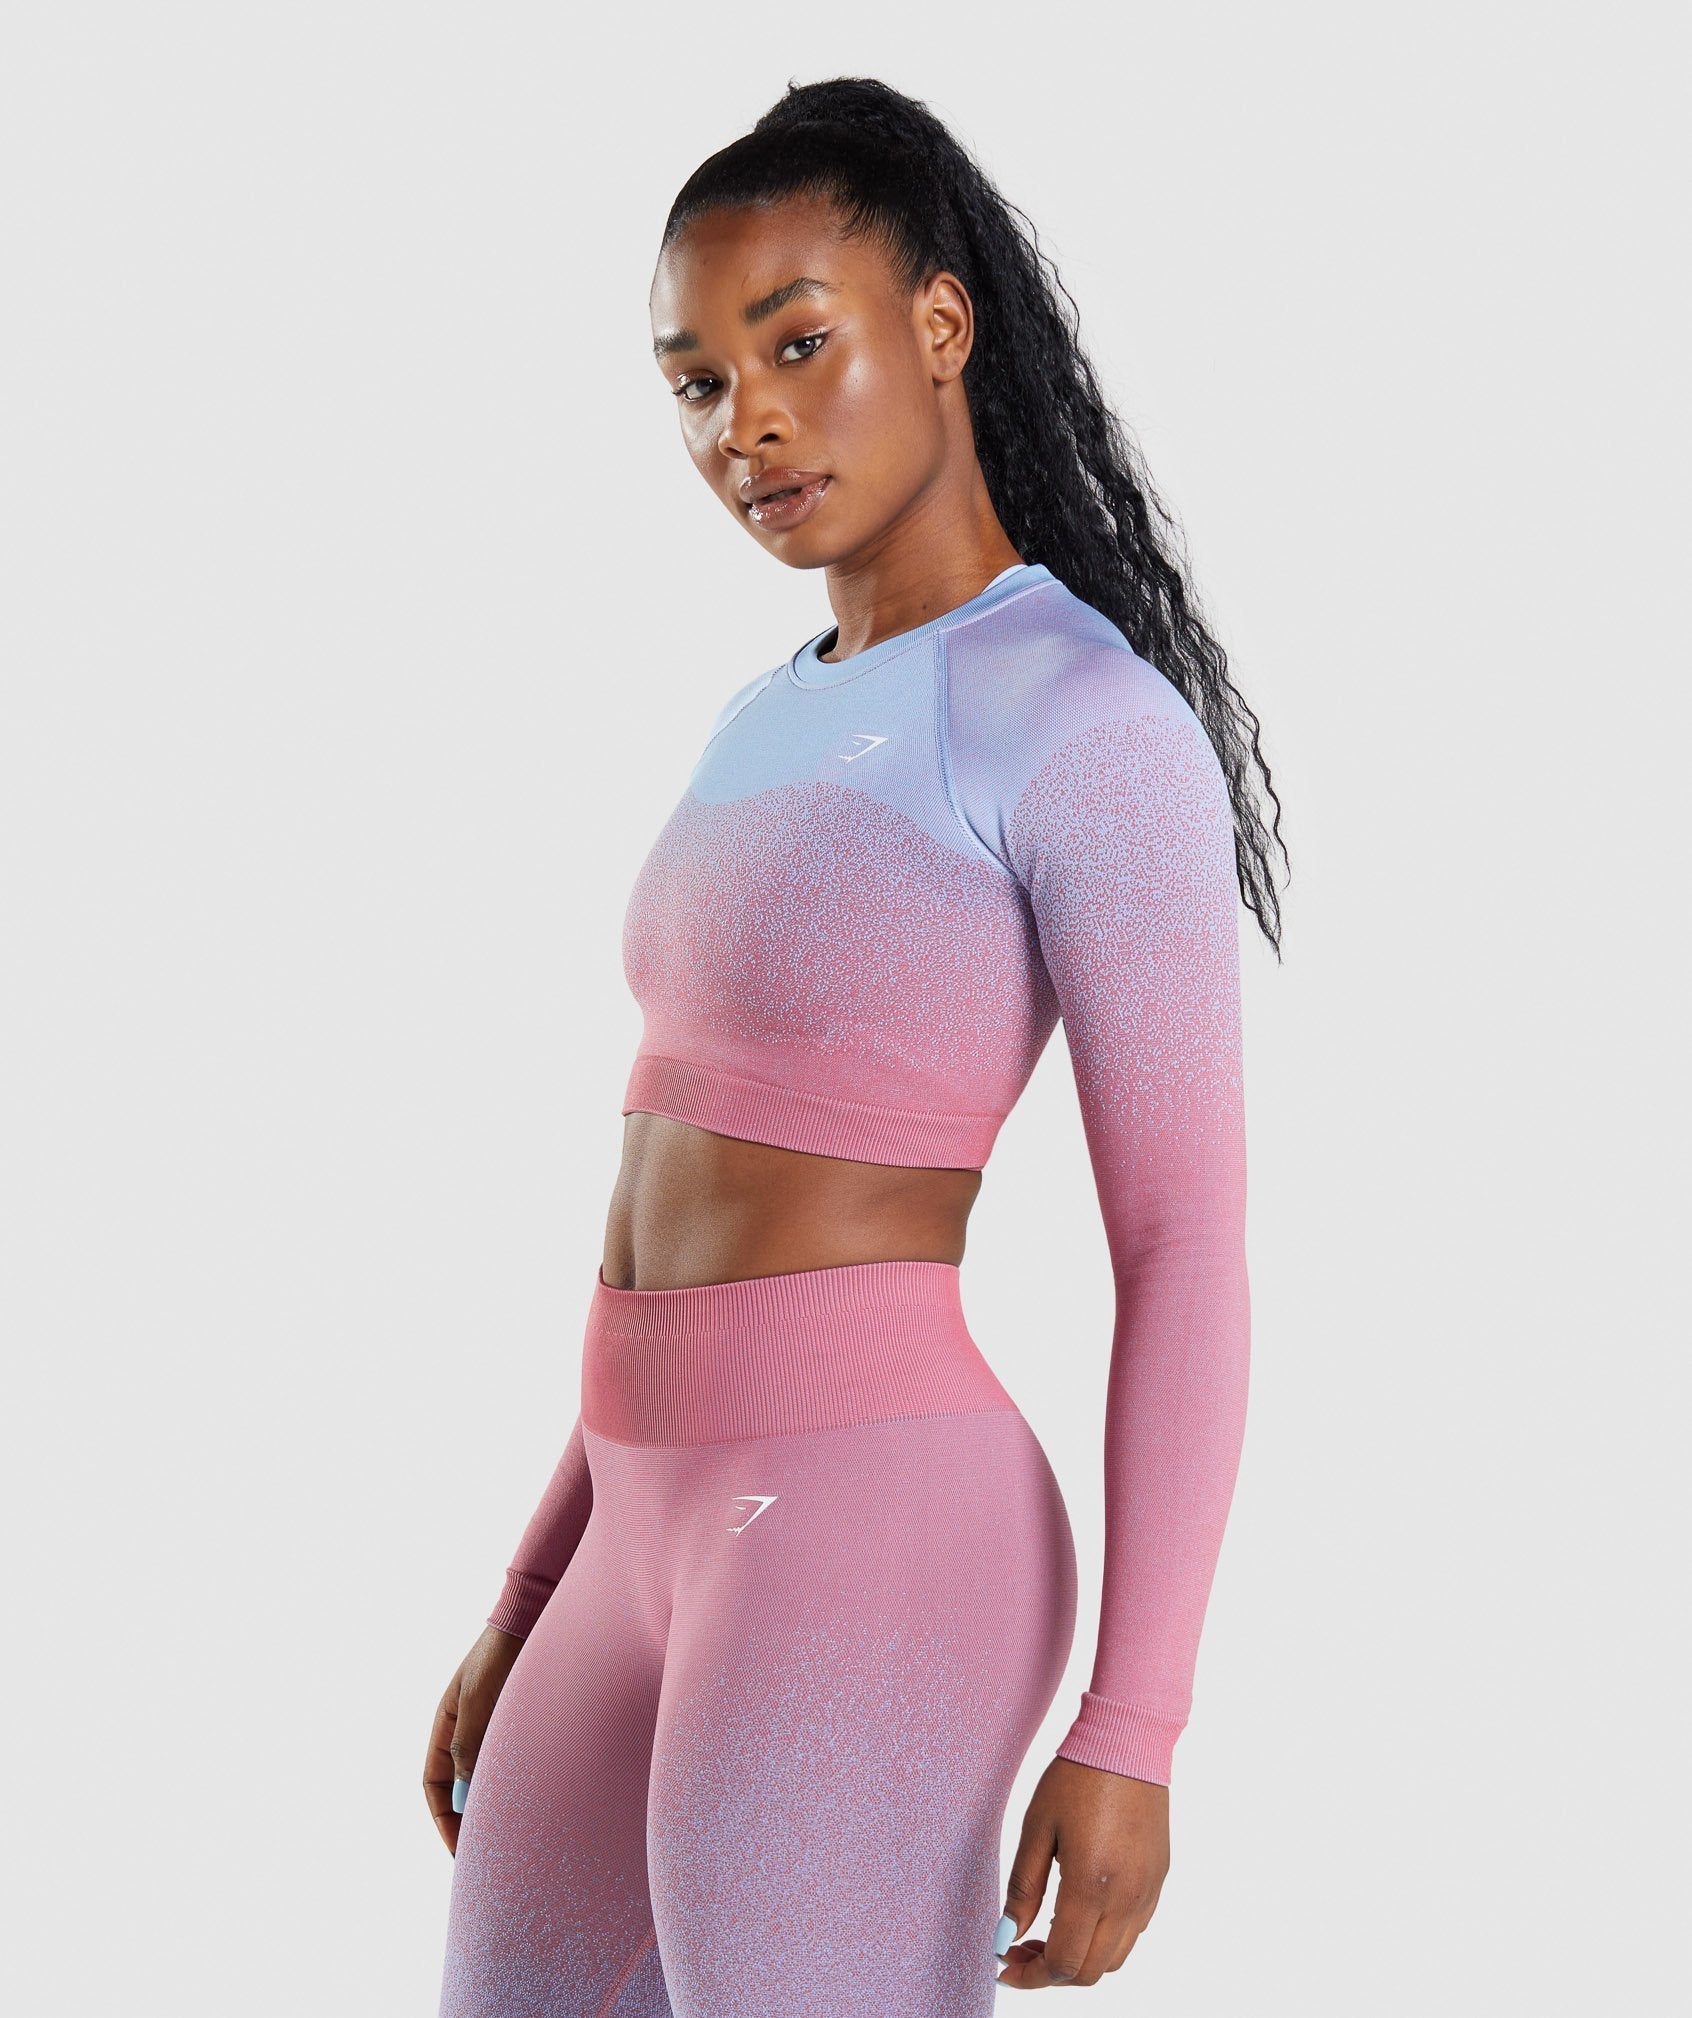 Adapt Ombre Seamless Long Sleeve Crop Top in Rose Pink/Light Blue - view 3